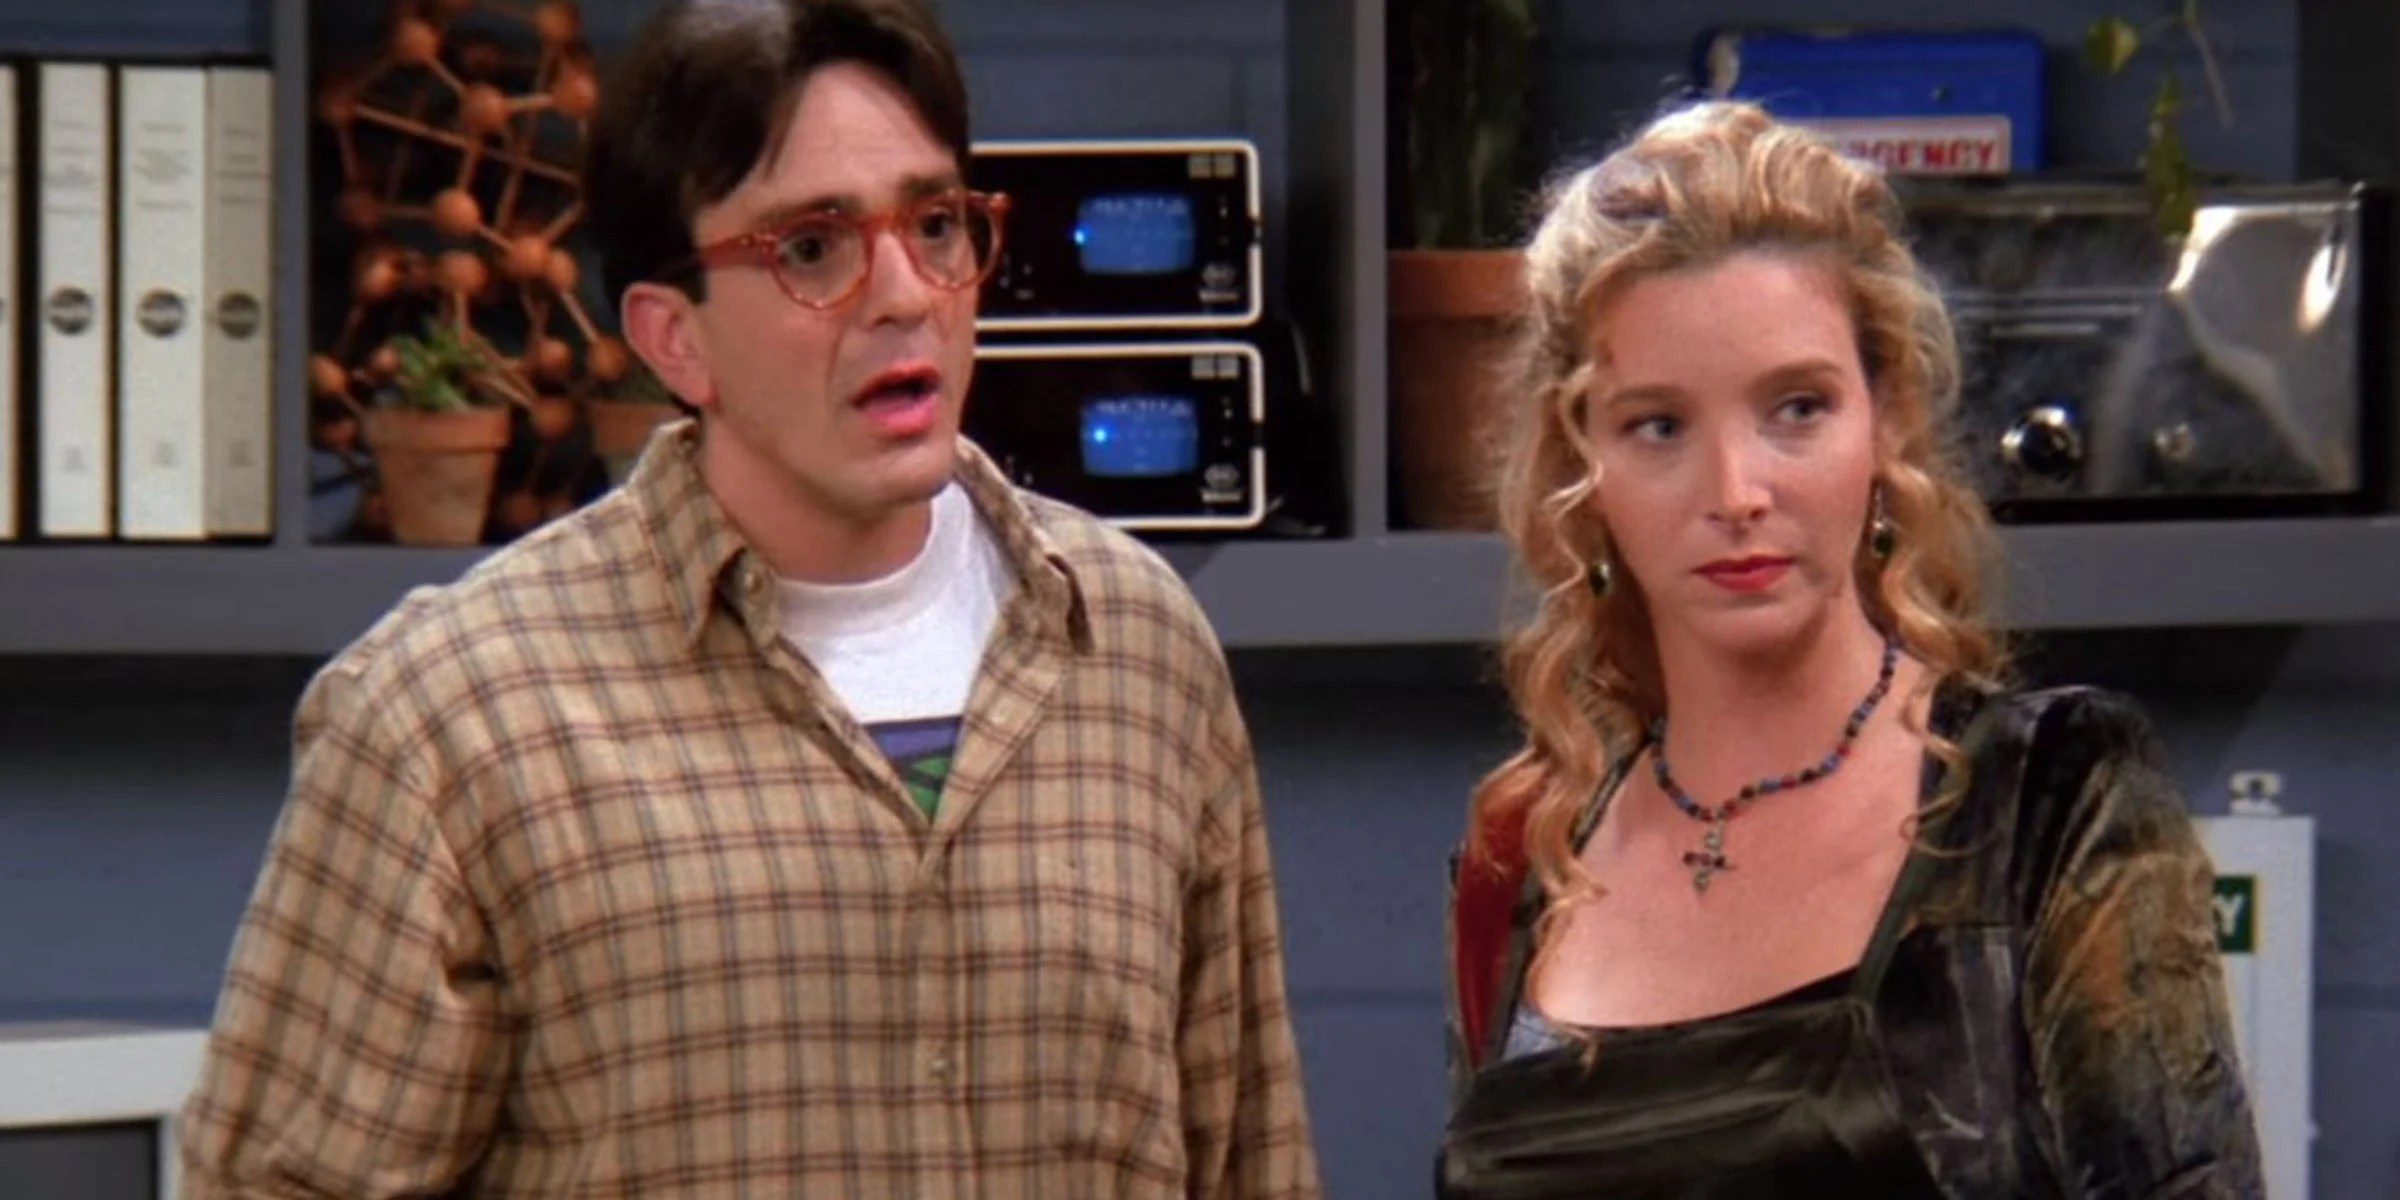 Friends&#39; co-creator reveals Phoebe could have ended up with David